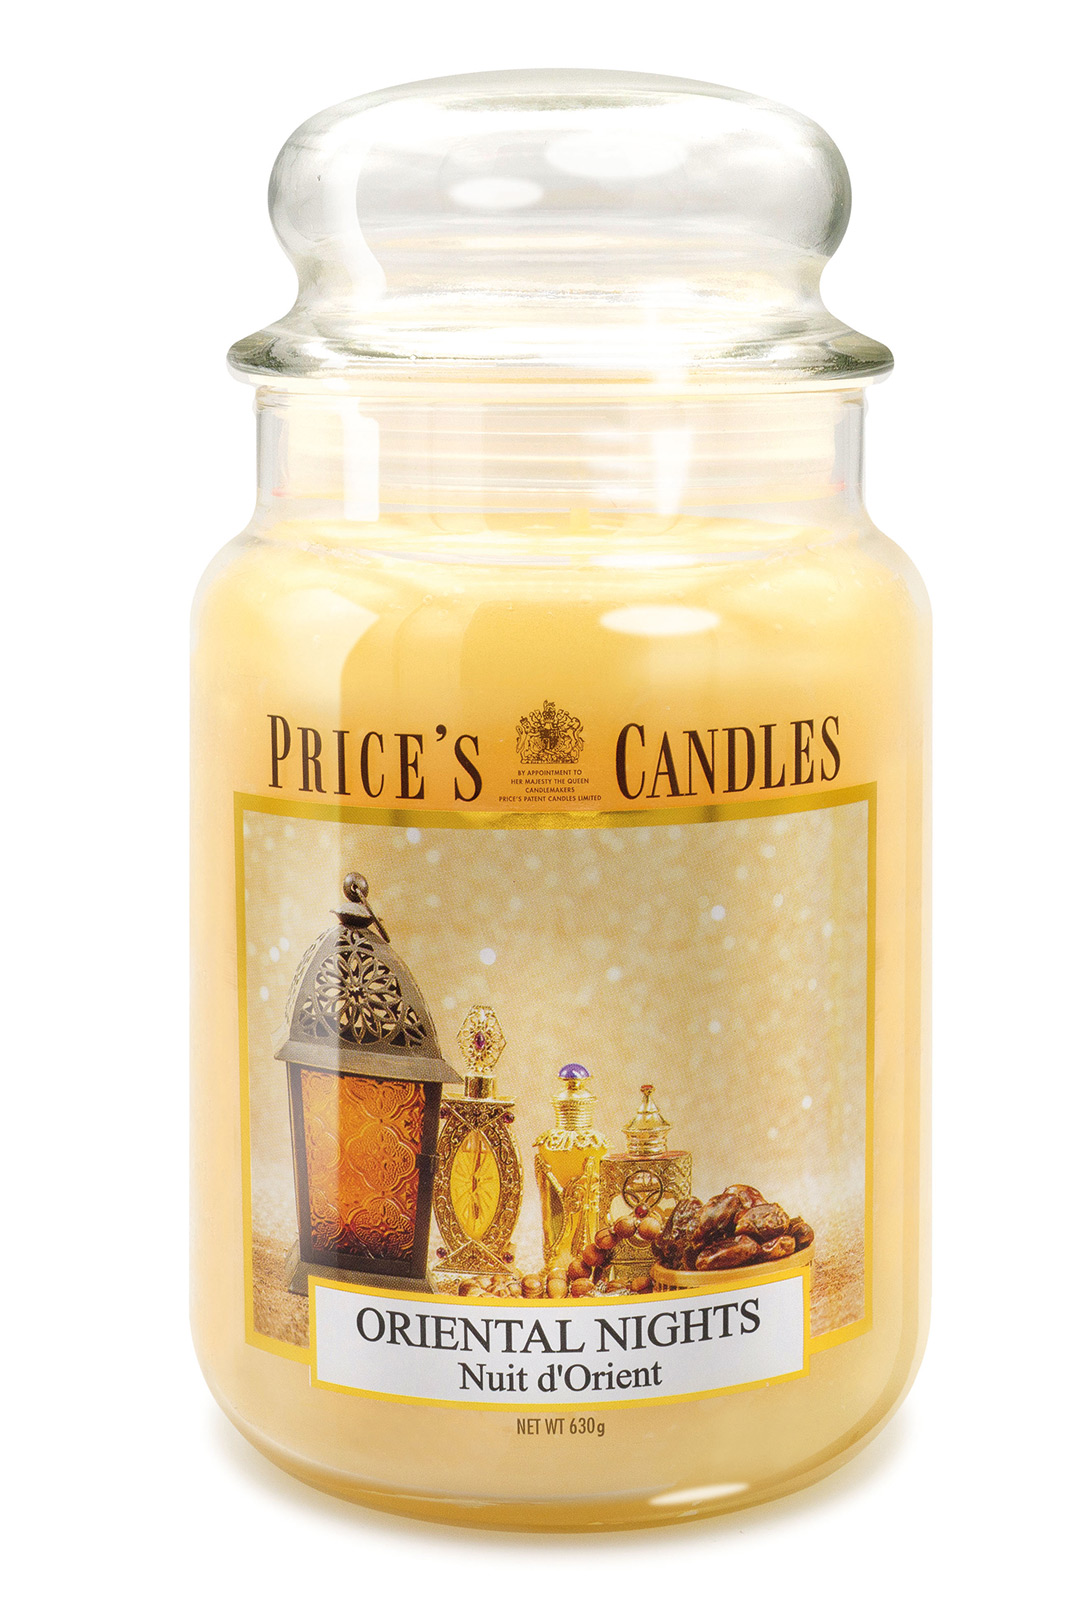 Prices Candle "Oriental Nights" 630g  